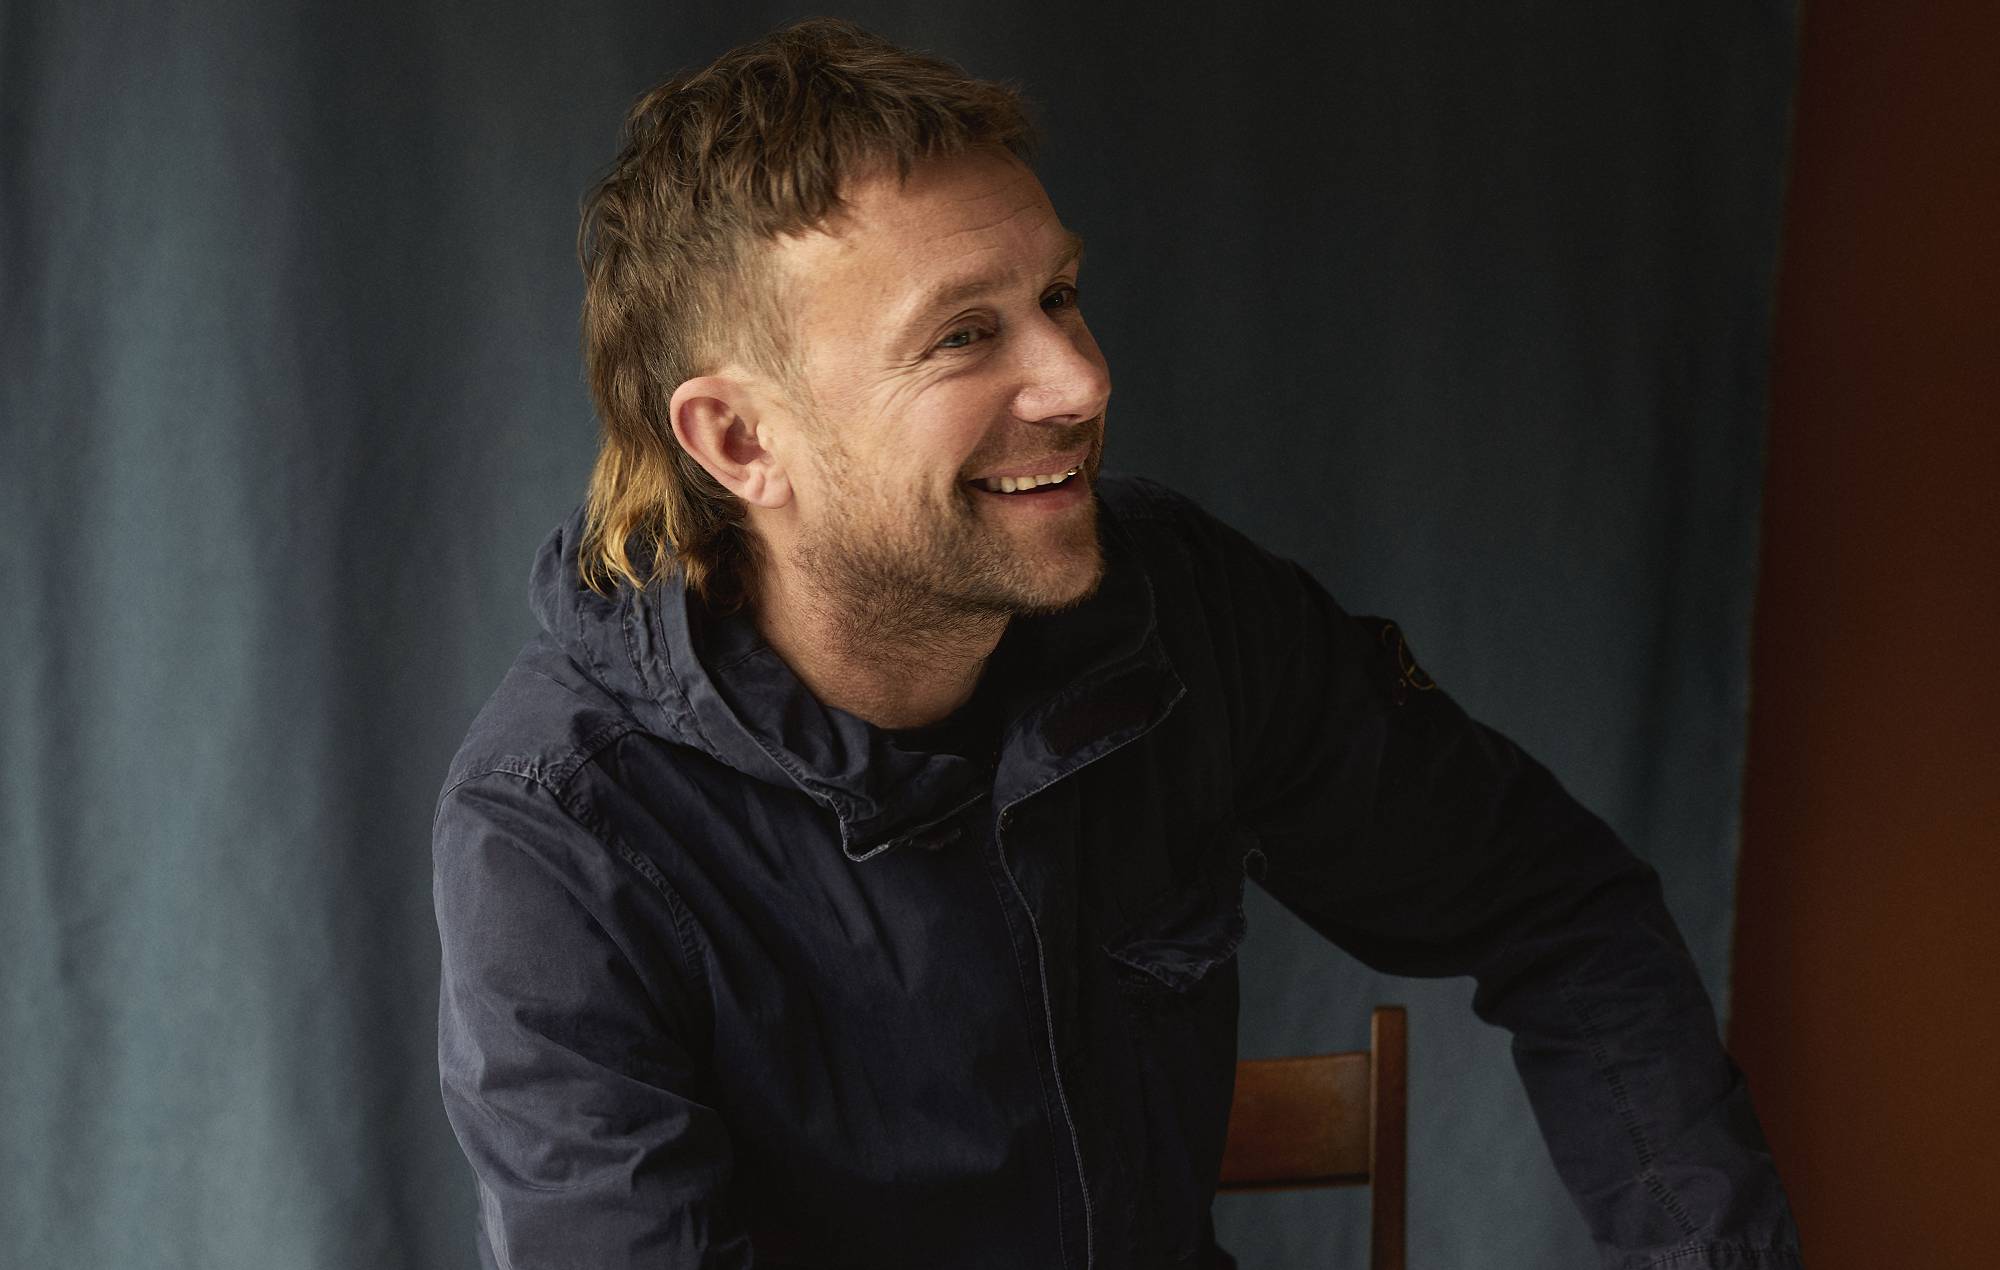 Damon Albarn: “I had to do something to lift me out of these storms”